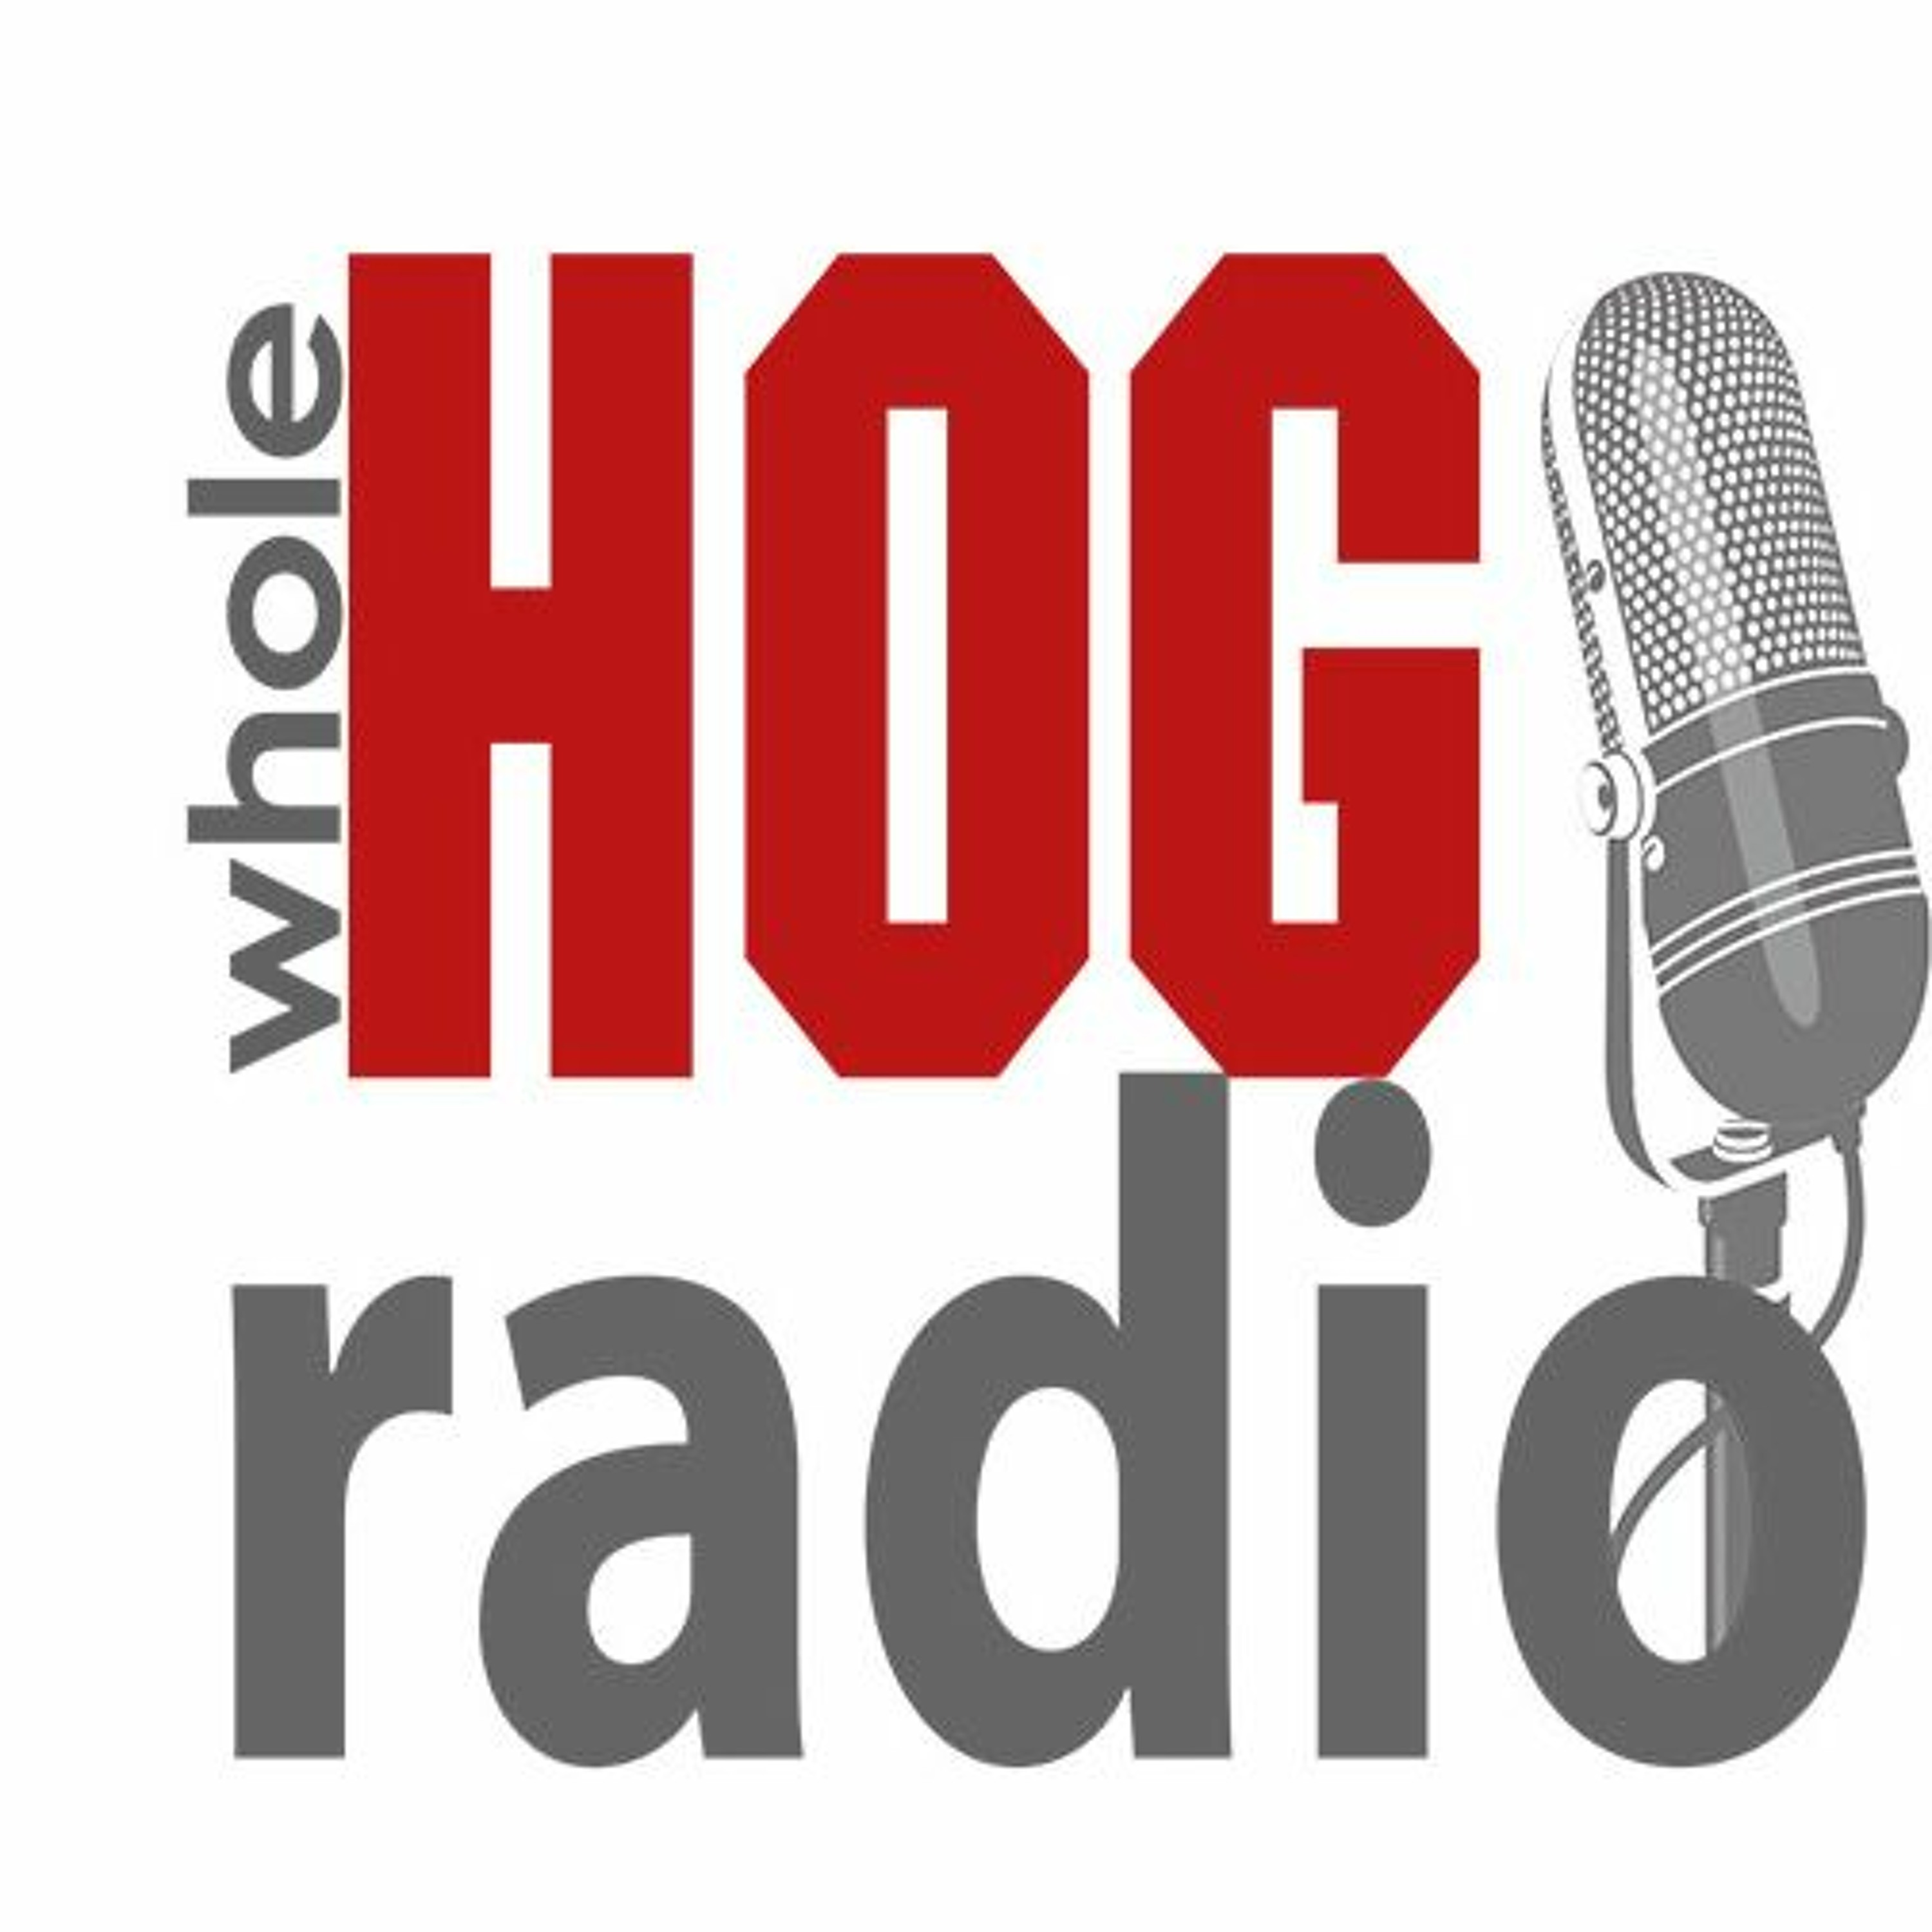 WholeHog Podcast: Best moments of the decade part 1; Ole Miss basketball preview